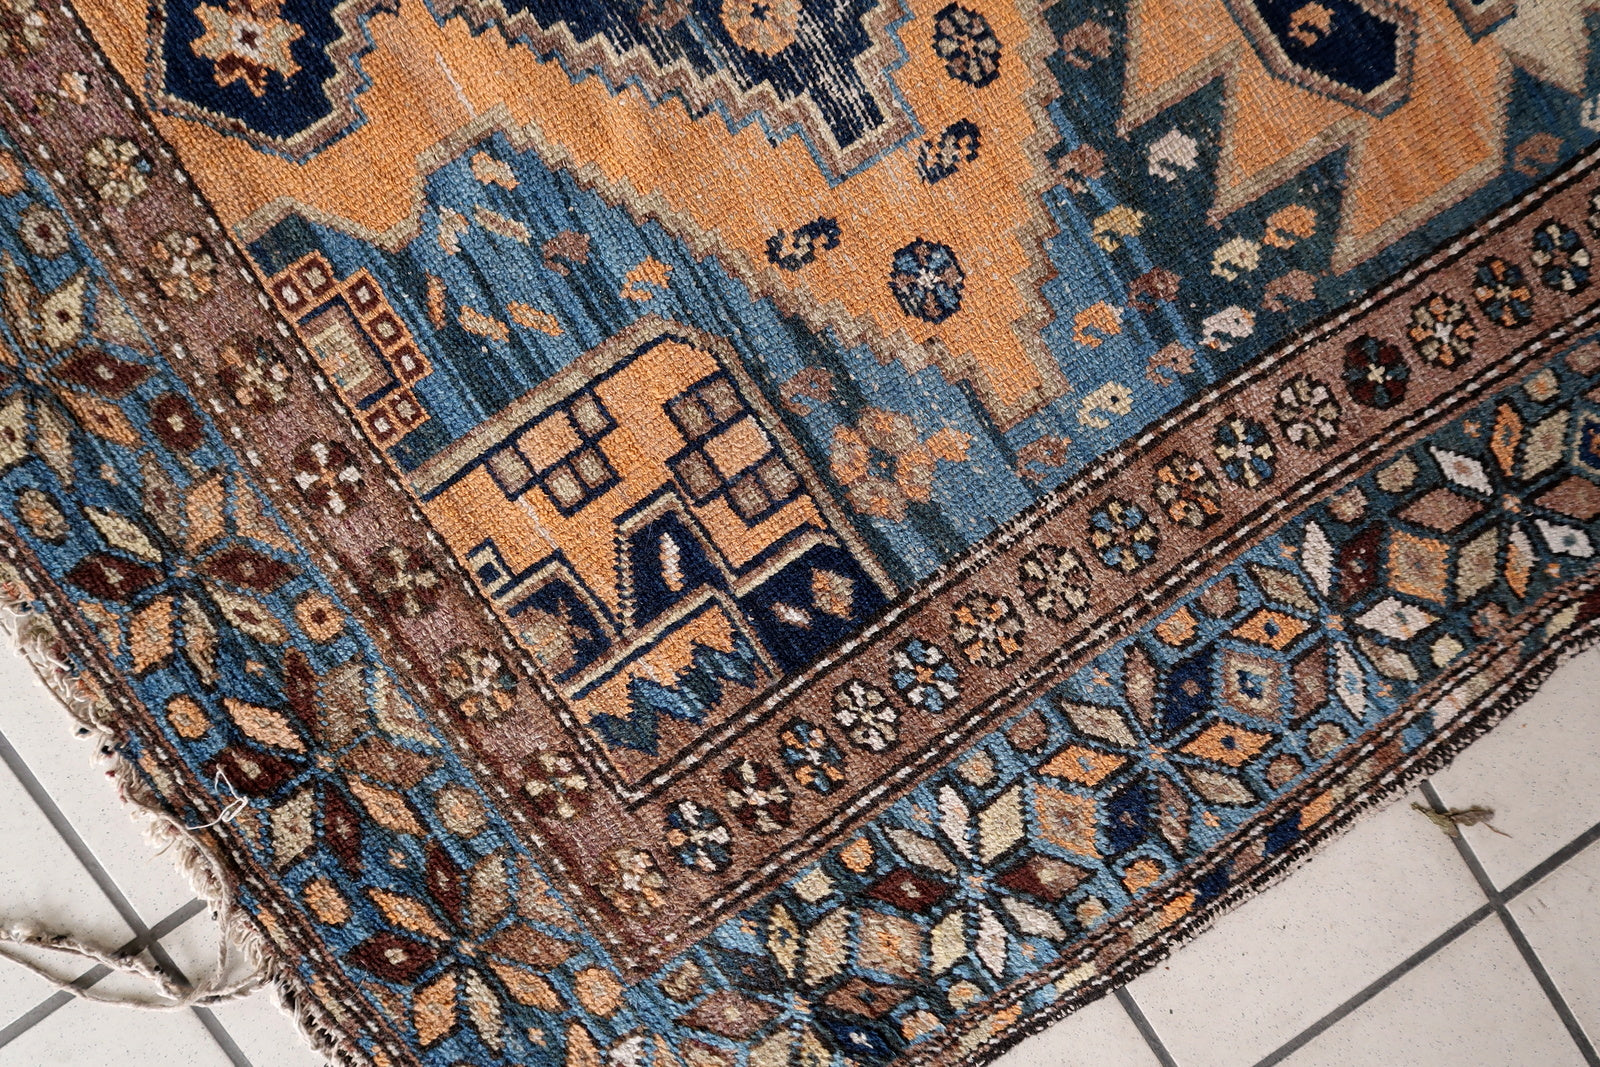 Close-up of rugged beauty on Handmade Antique Caucasian Shirvan Rug - Detailed view capturing the rugged beauty evoked by the color palette.